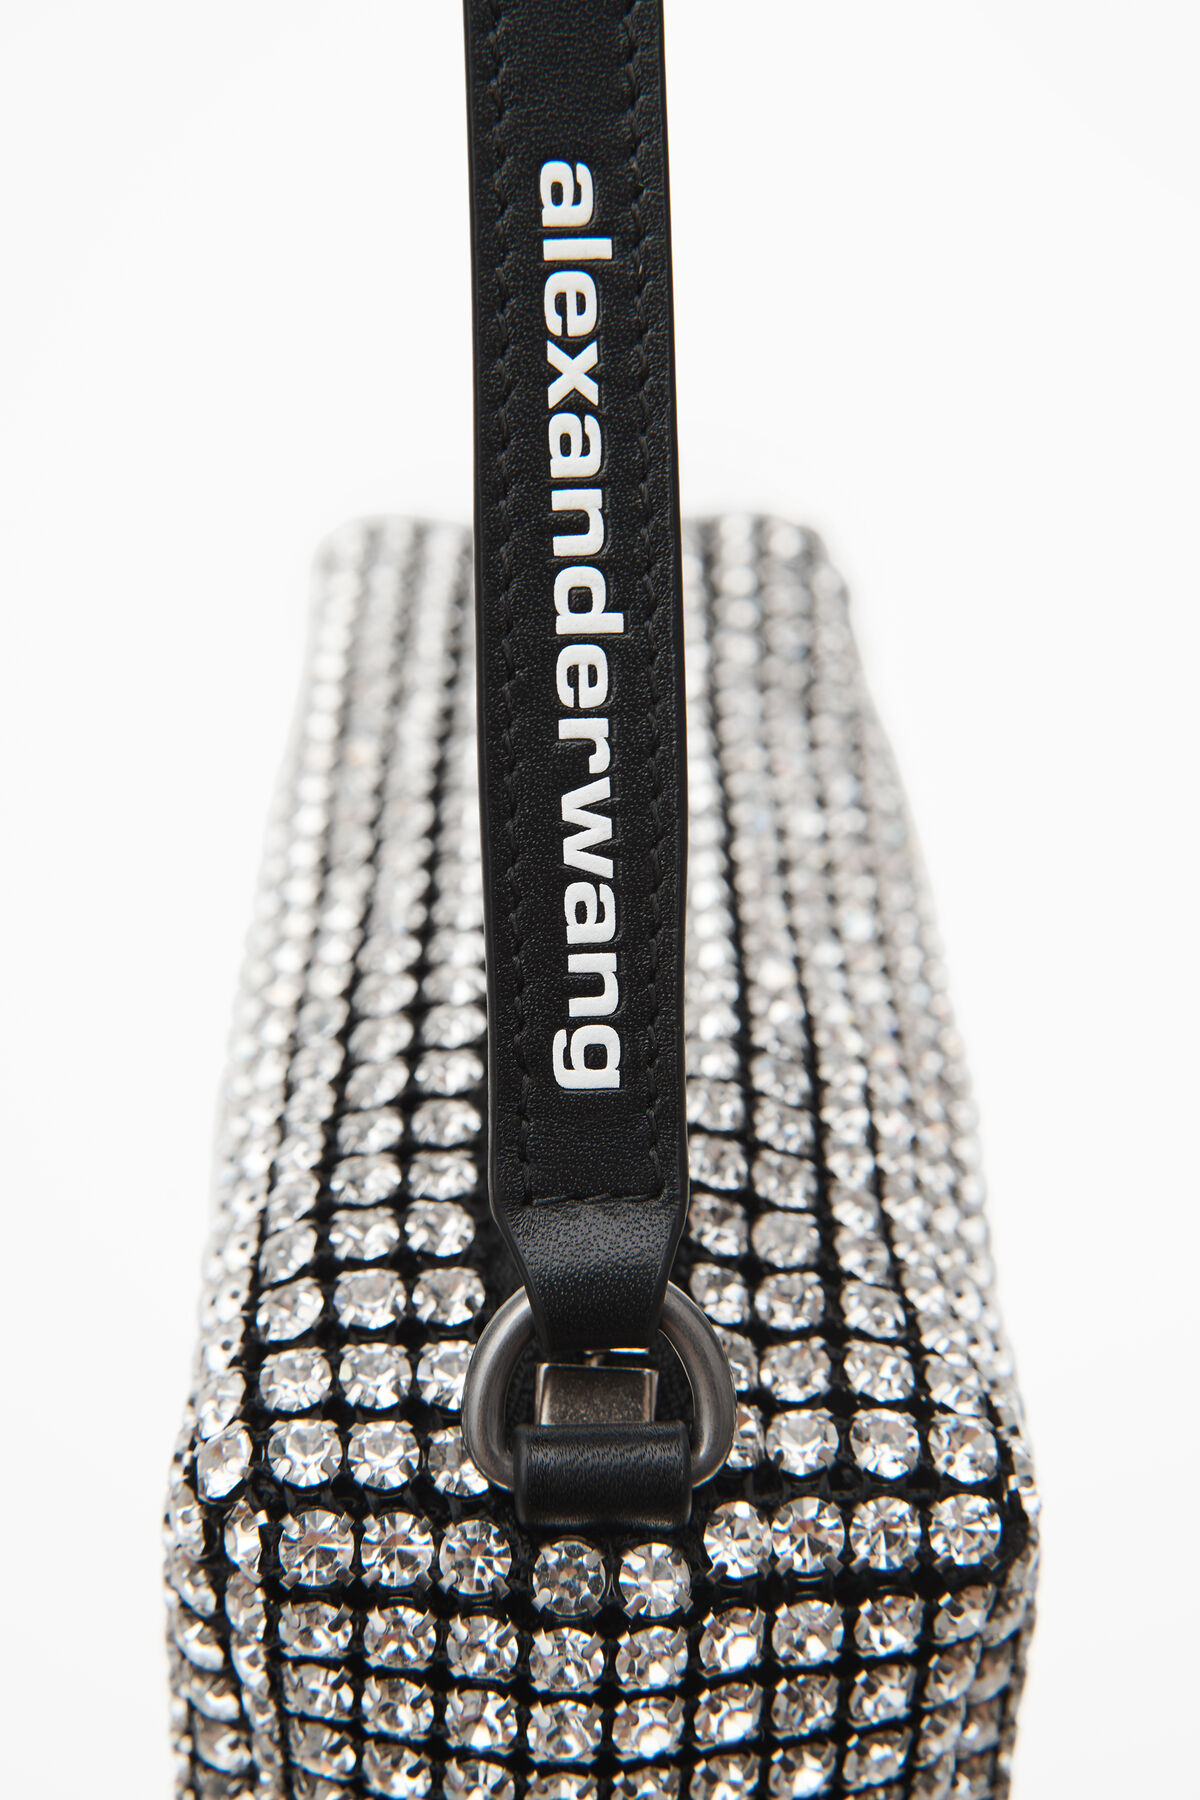 A dupe for the Alexander Wang Heiress Rhinestone Pouch! This one